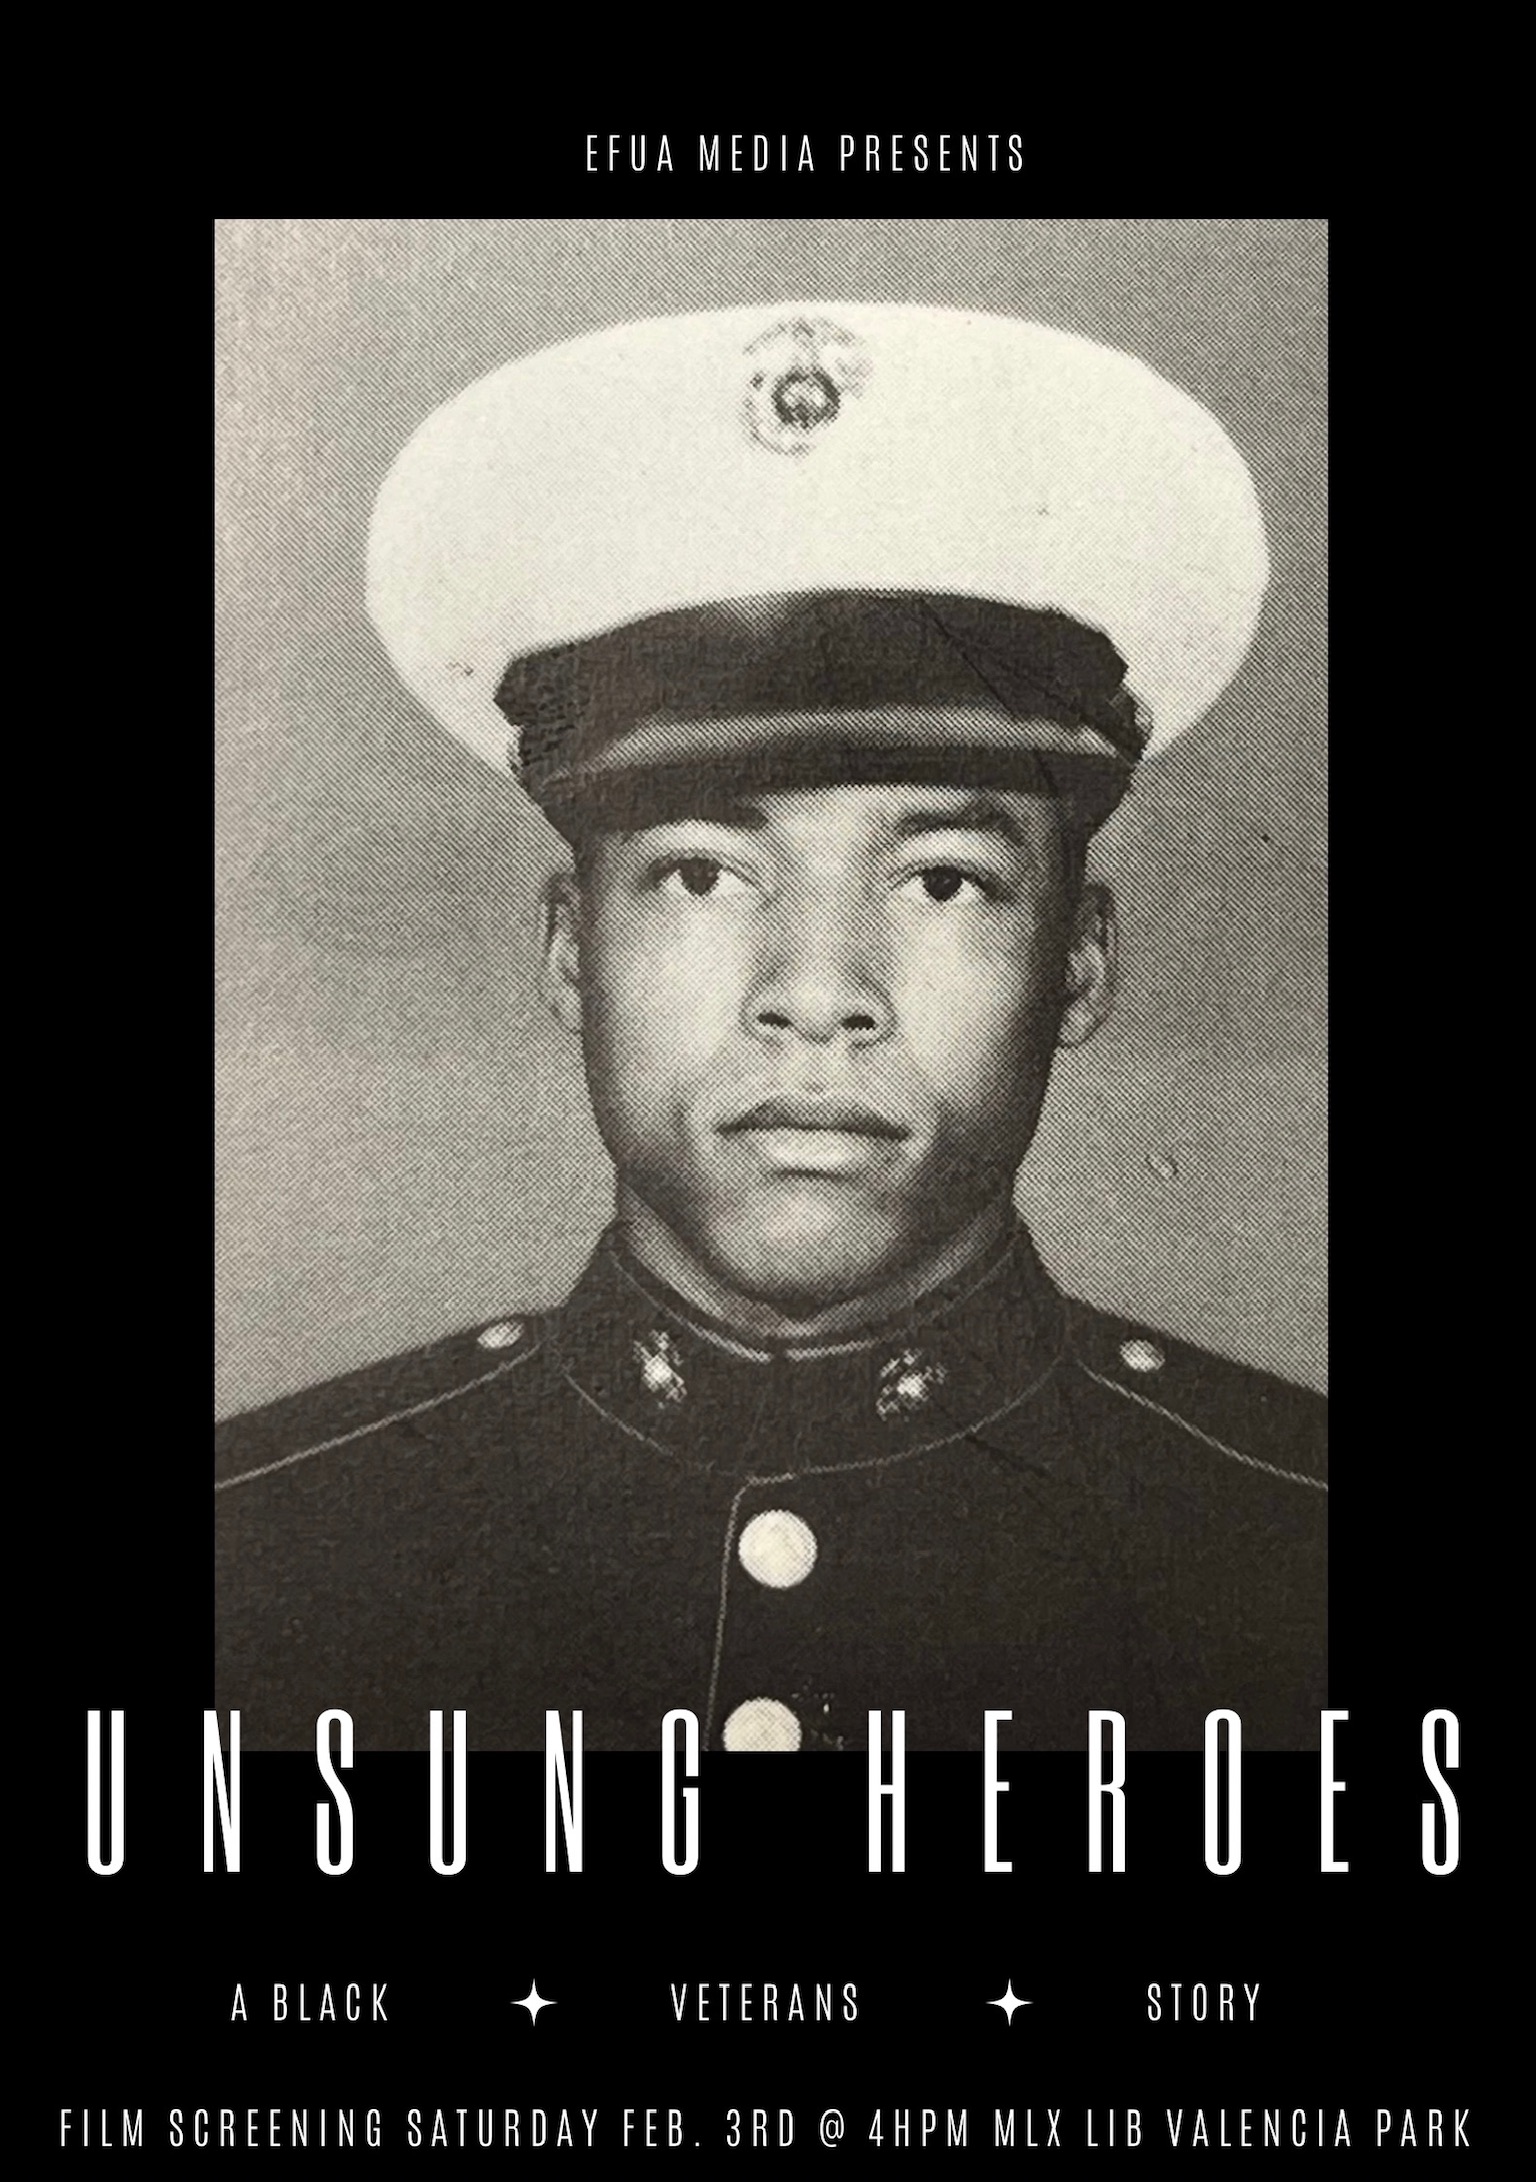 Black and white military portrait of young Marine Alfred Bowdan above text reading "Unsung Heroes" and screening information